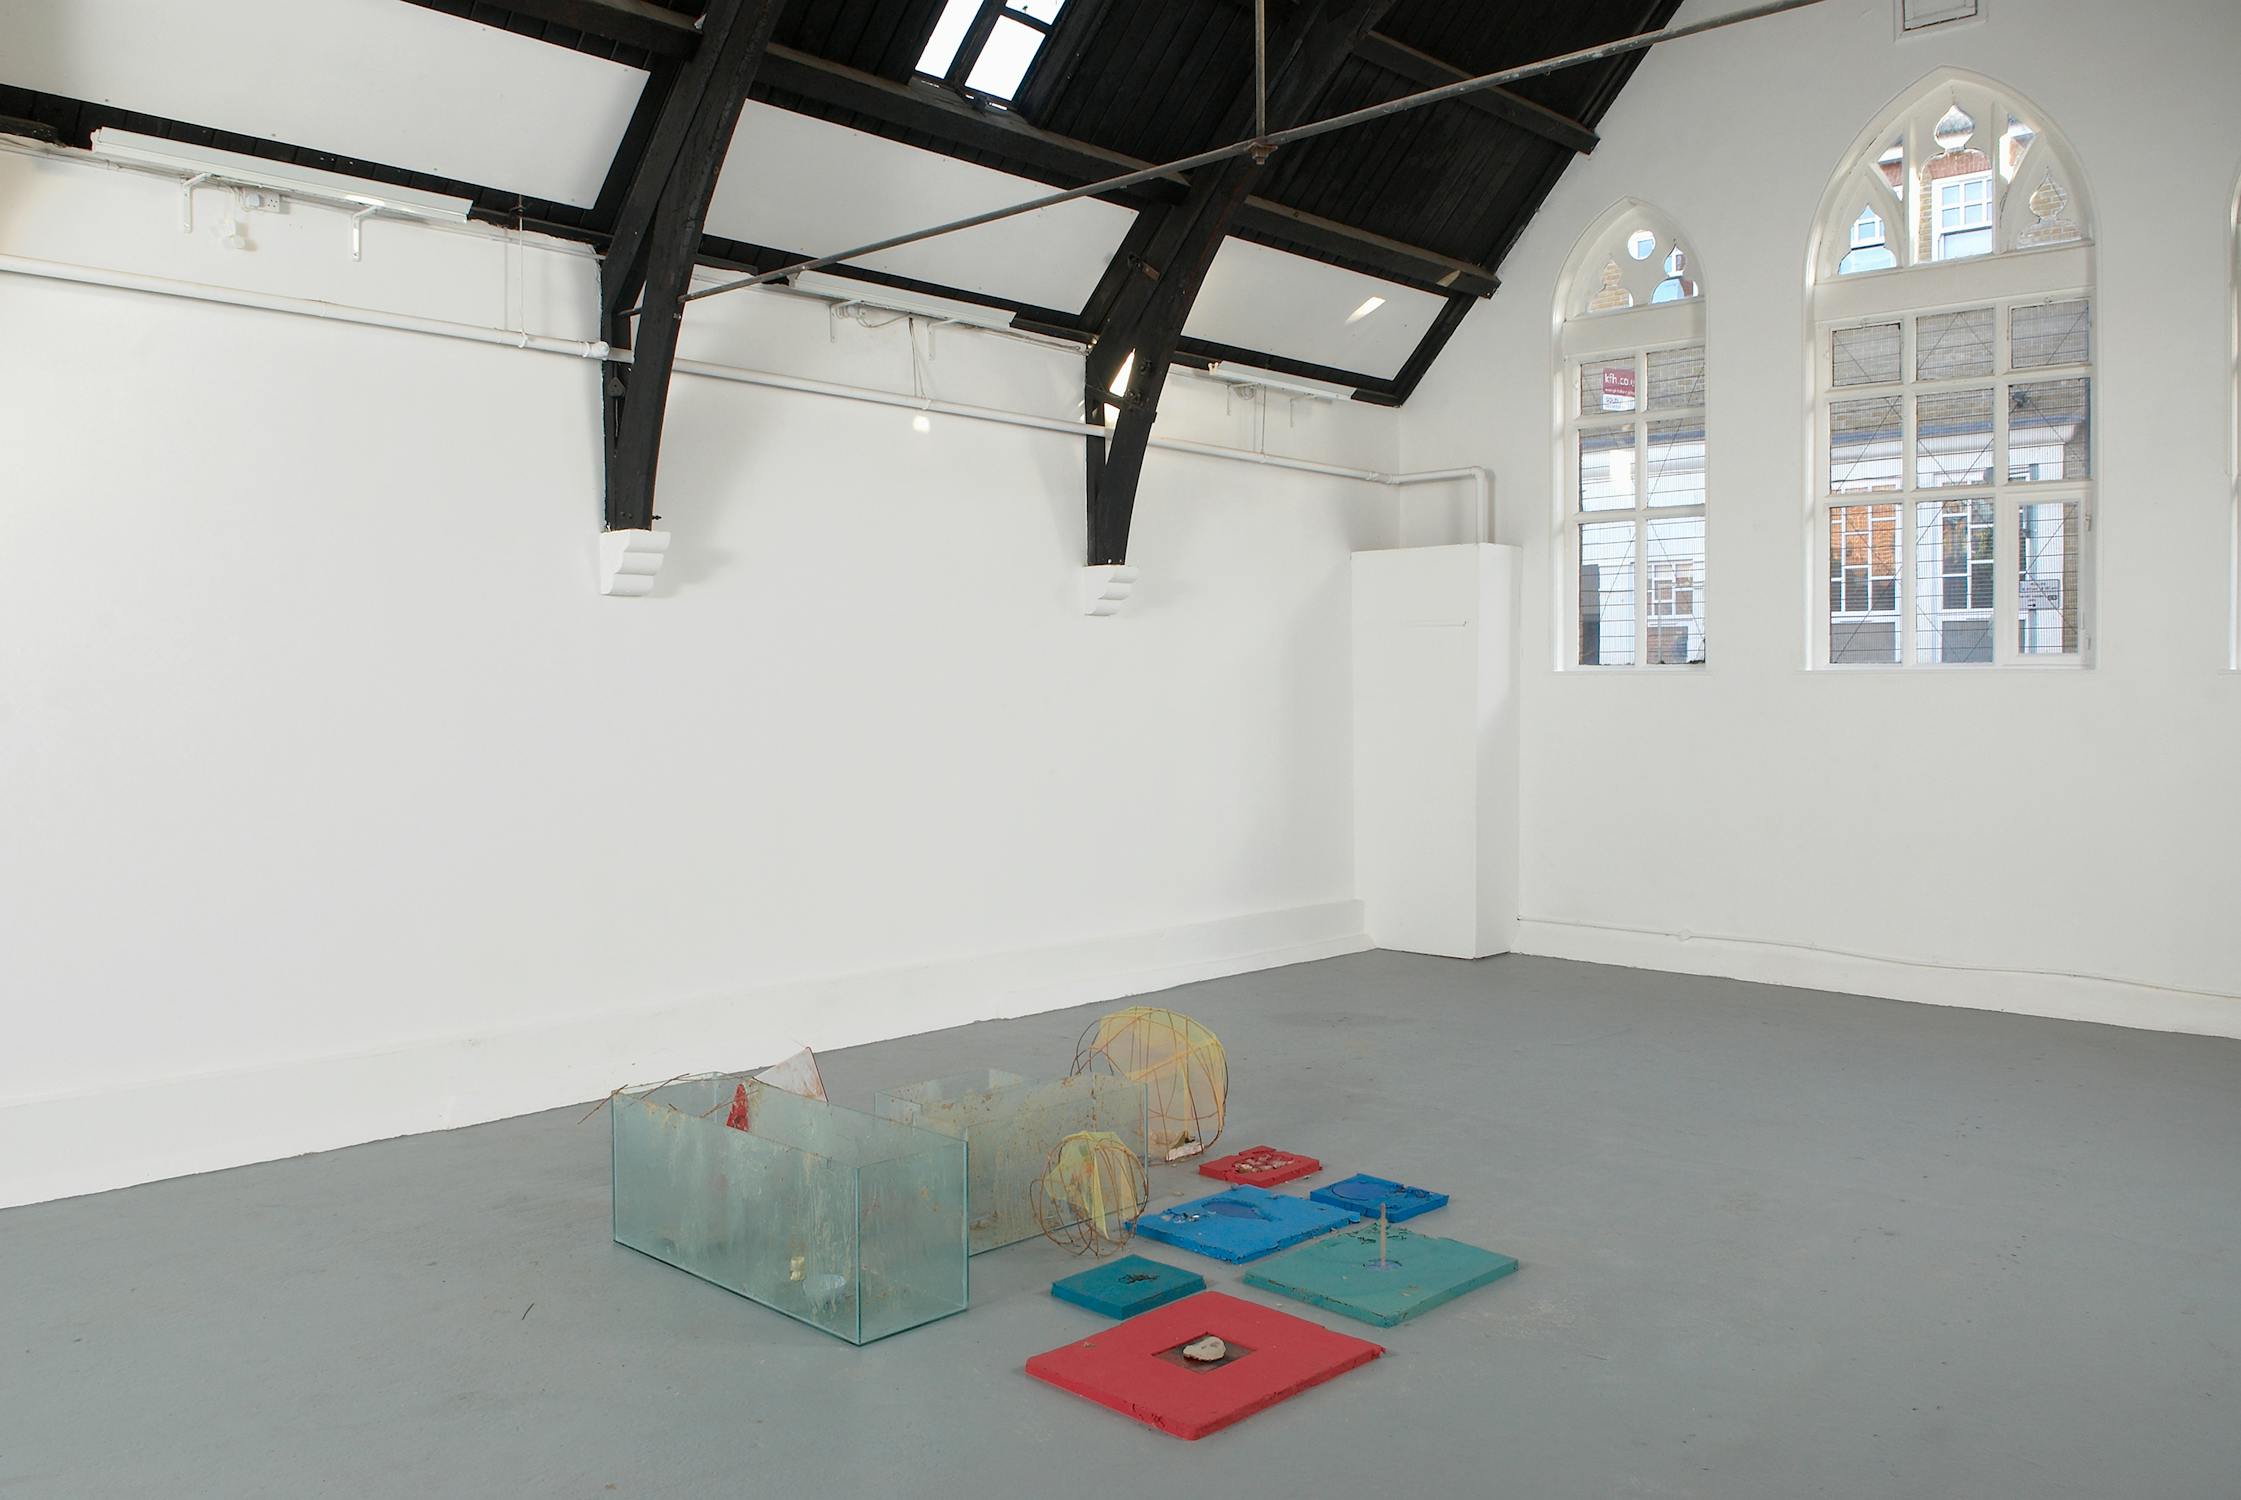 A wide angle photo of Studio Voltaire's arched gallery space. In the middle of the frame, a collection of three glass tanks smeared with porridge sit amongst a collection of low to the ground red, green and blue cast silicon blocks. amongst these objects sit two open-weave twine structures topped with scraps of yellow net